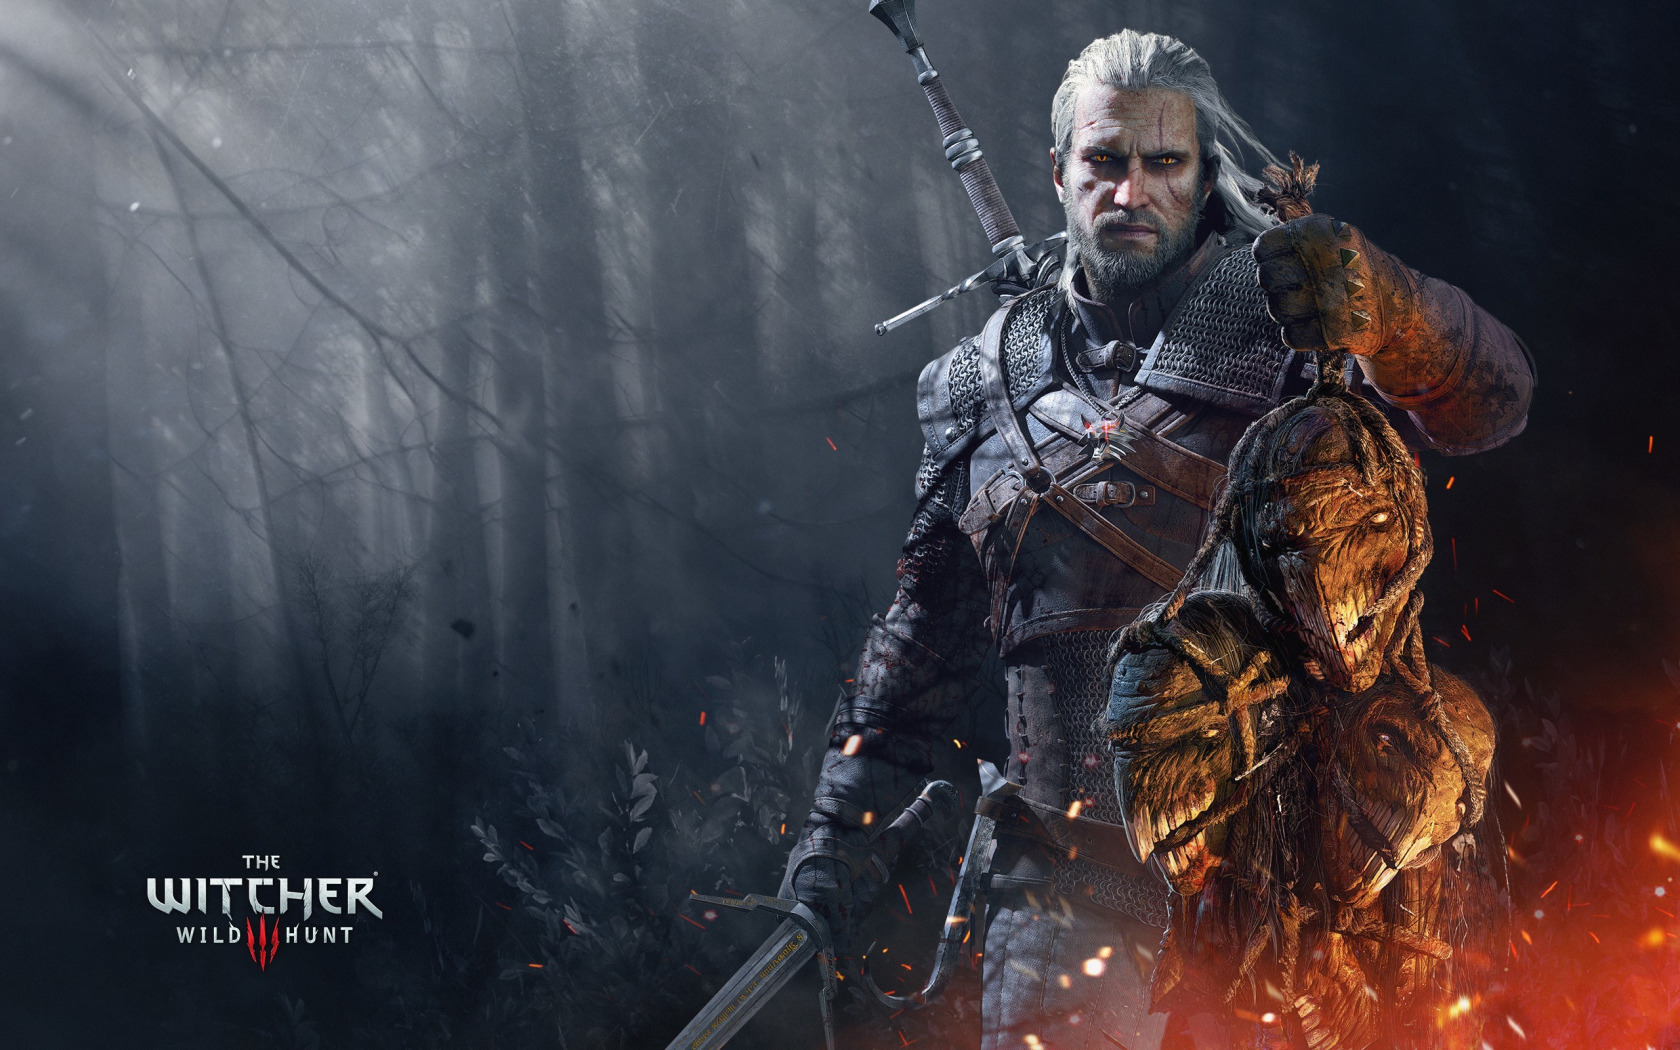 The witcher 3 witcher school gear фото 28